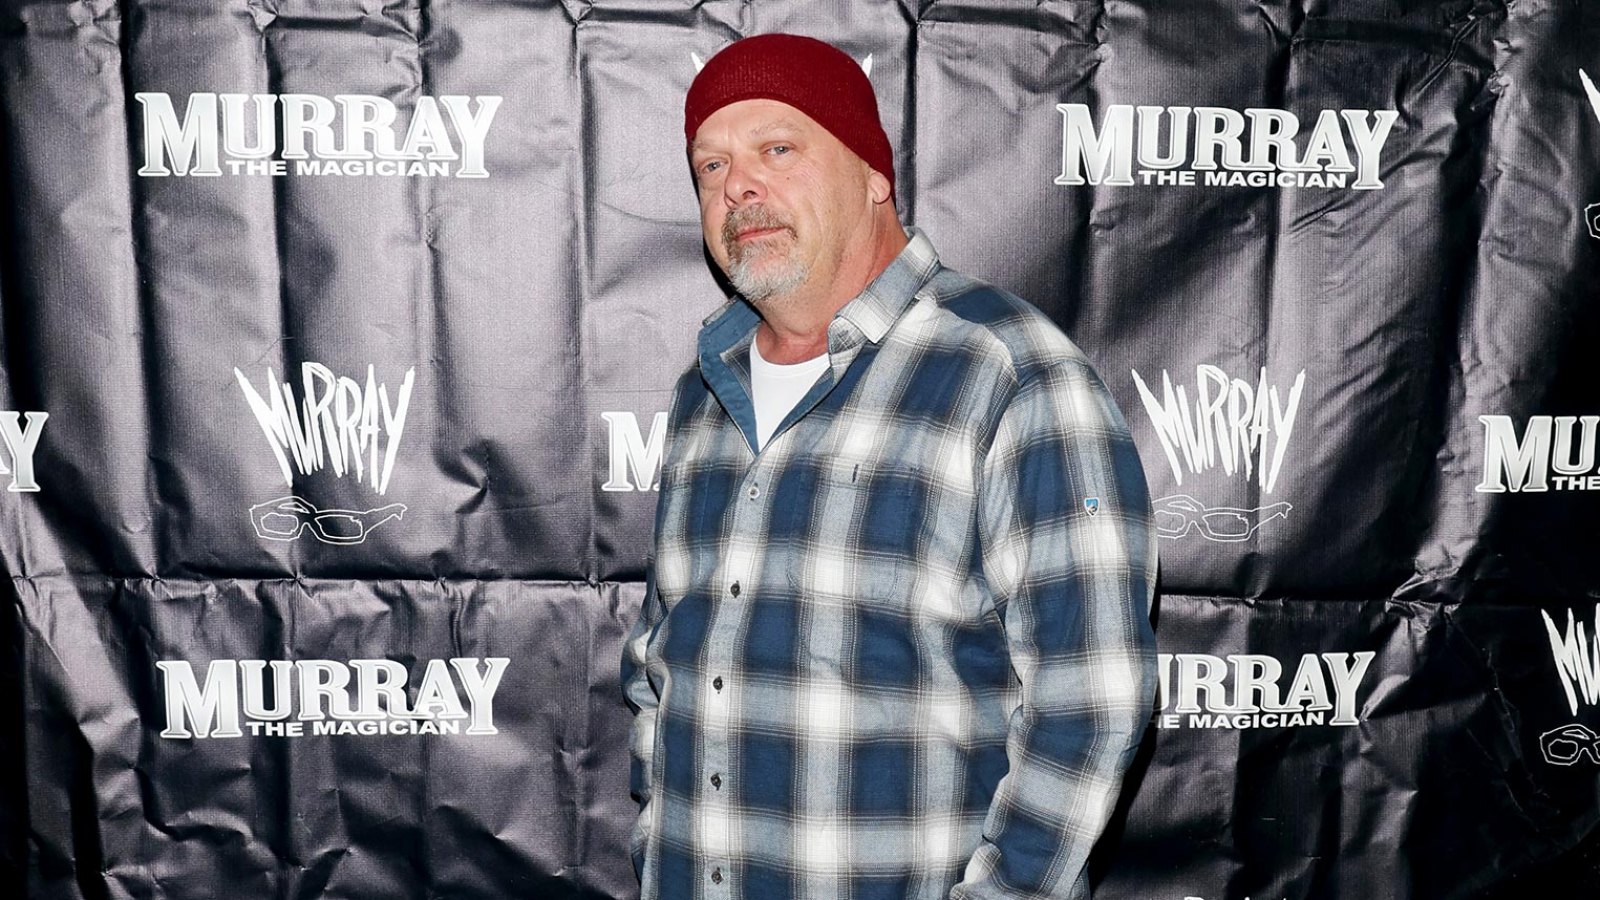 Pawn Stars Host Rick Harrison Mourns Son Adam After Fatal Overdose at 39